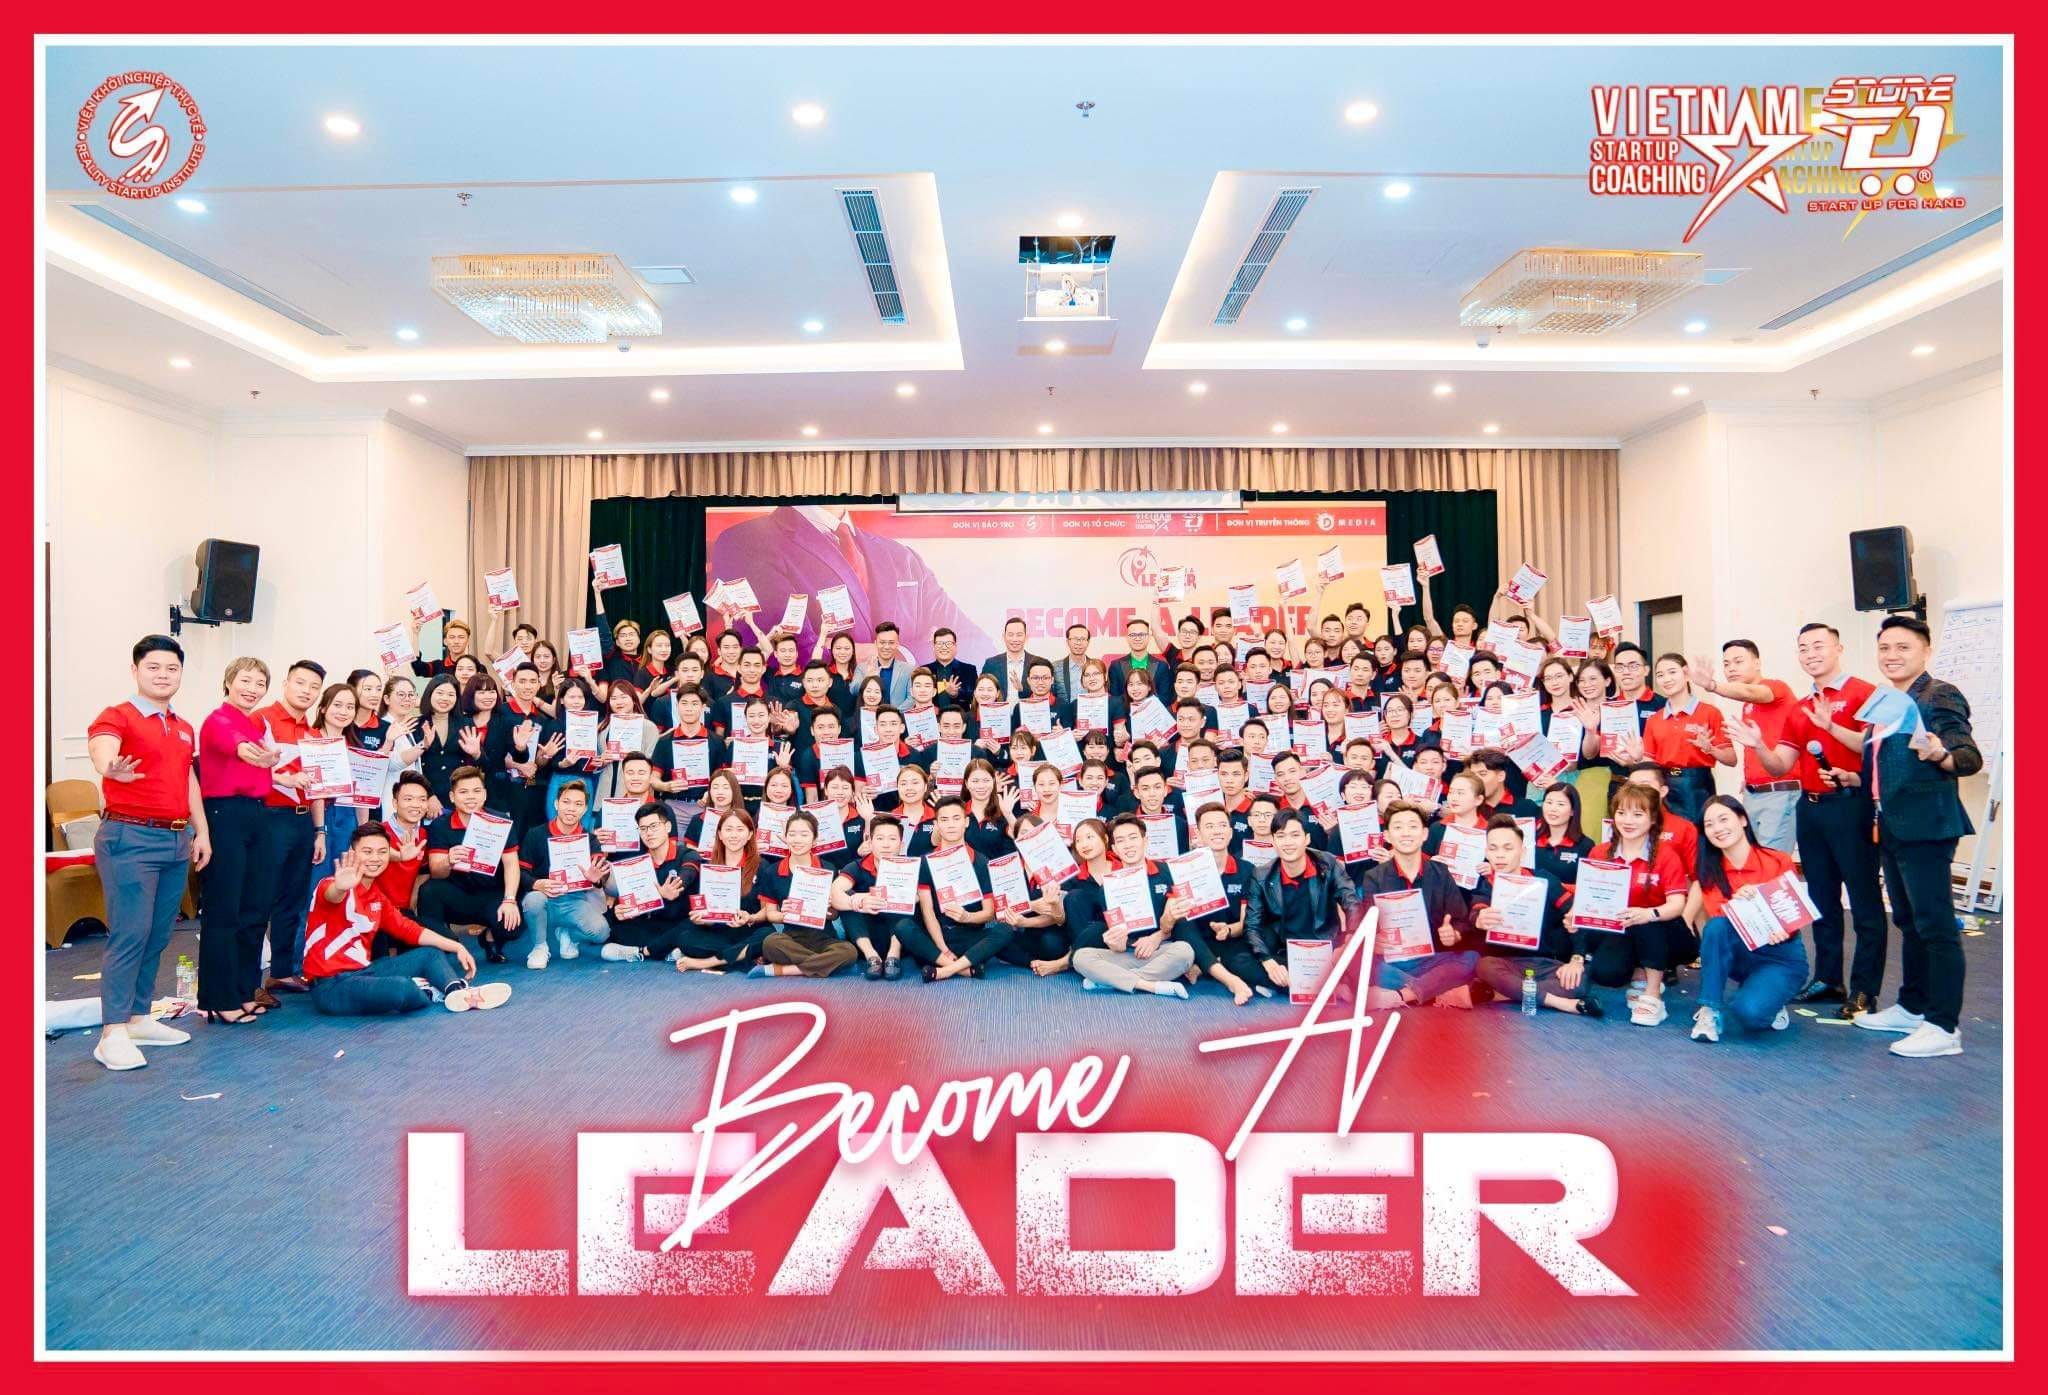 Become A Leader 08 - Cty CP DStore HN